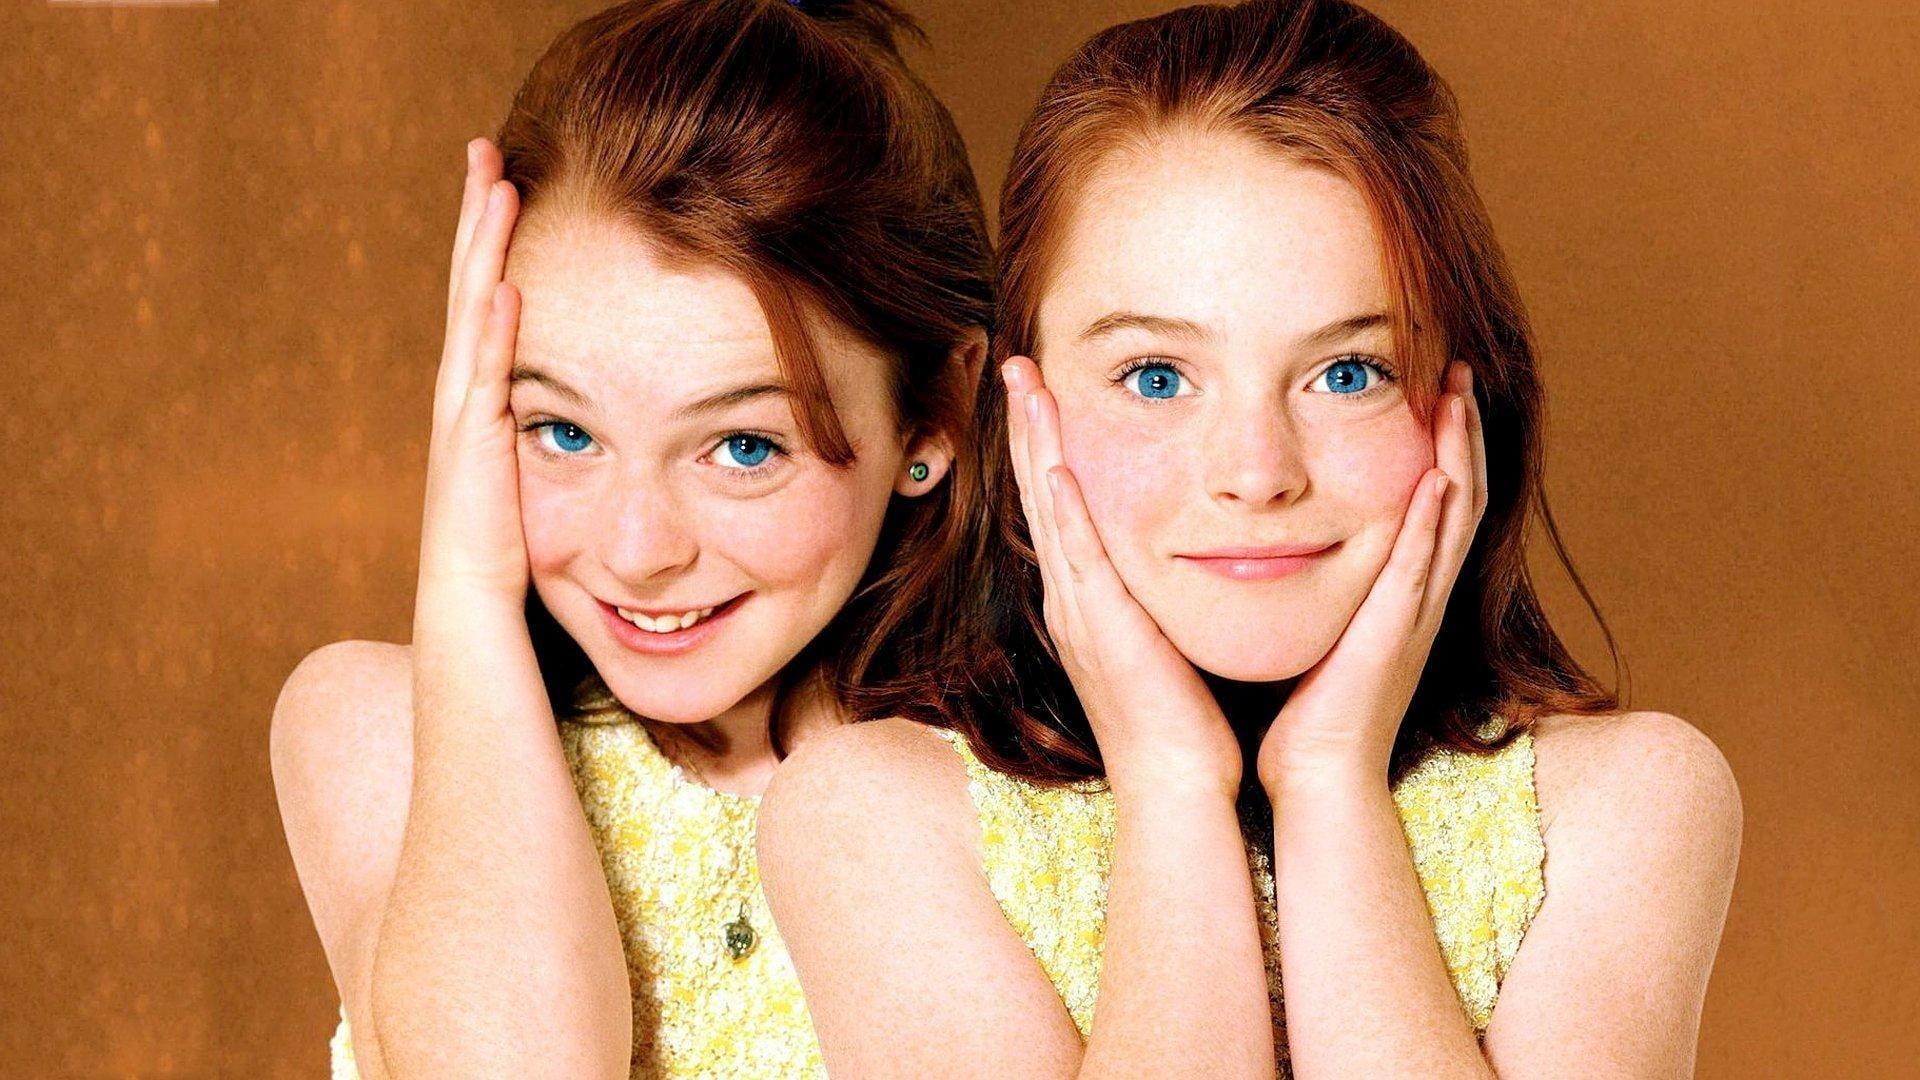 two twin red headed girls, the cover of the film The Parent Trap